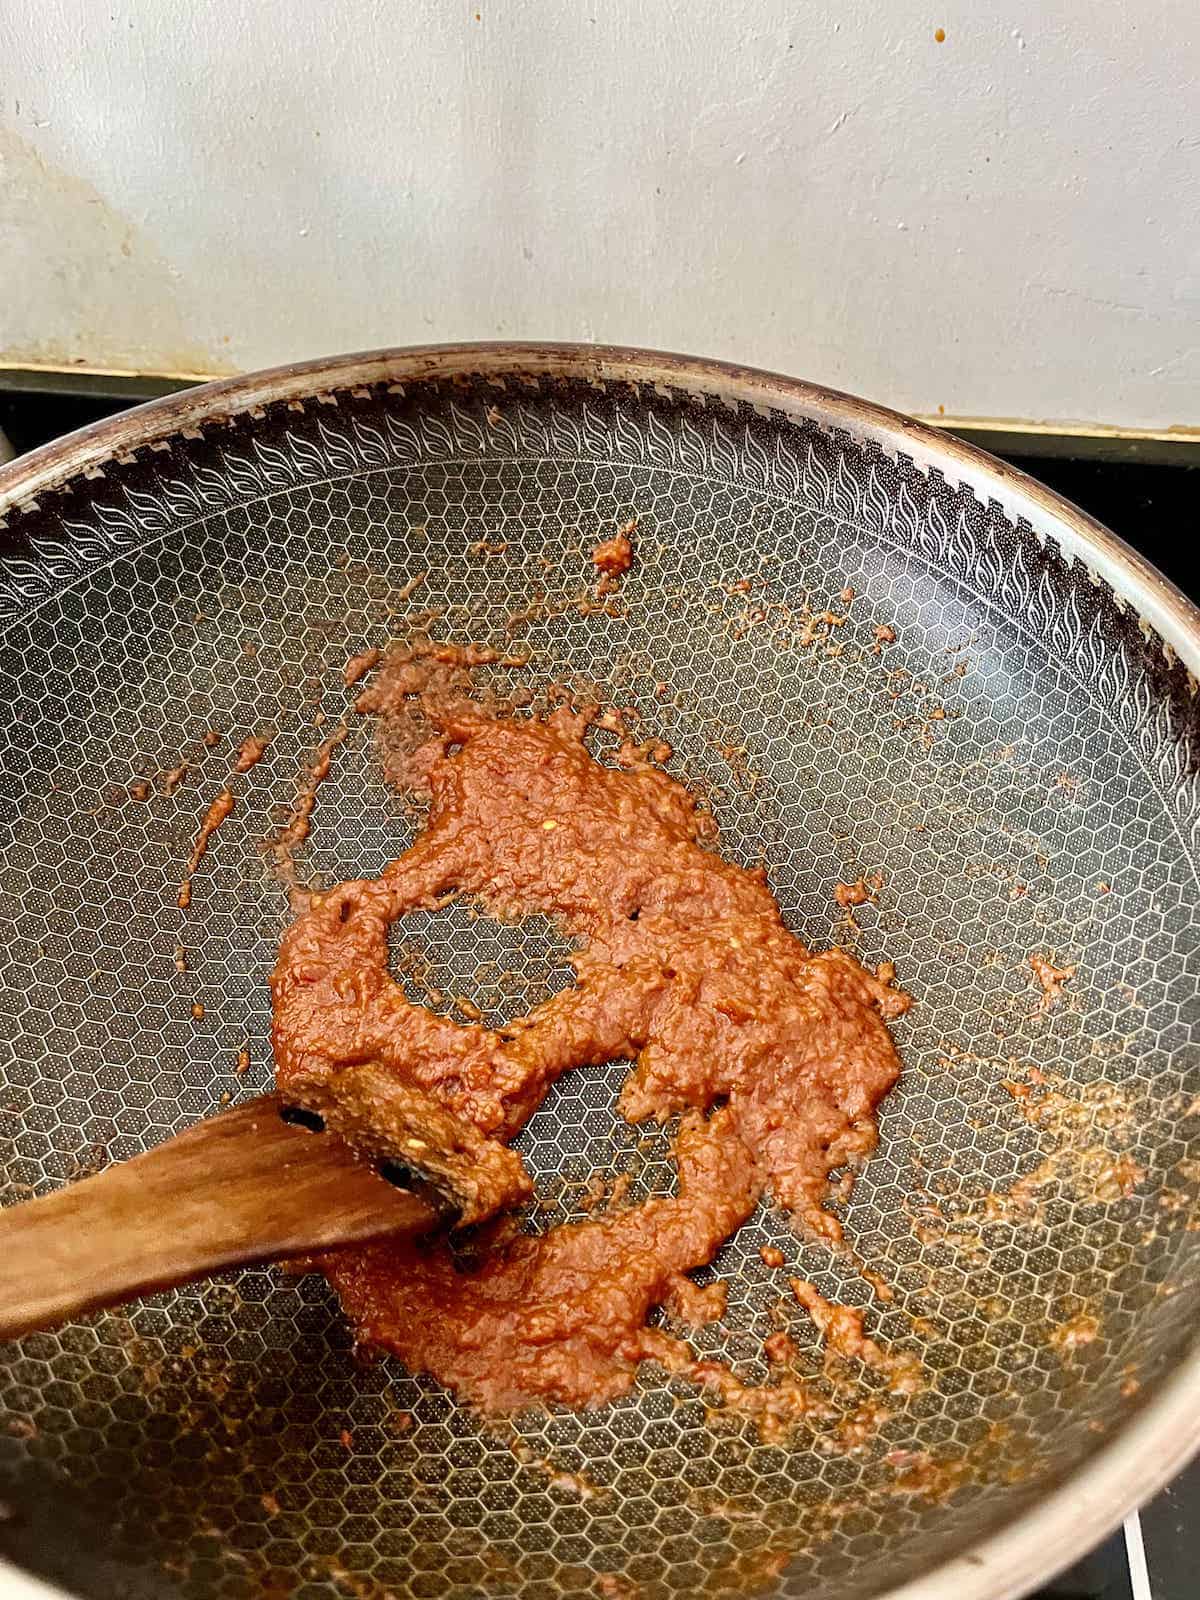 Chili paste rempah after stir-frying for a few minutes.